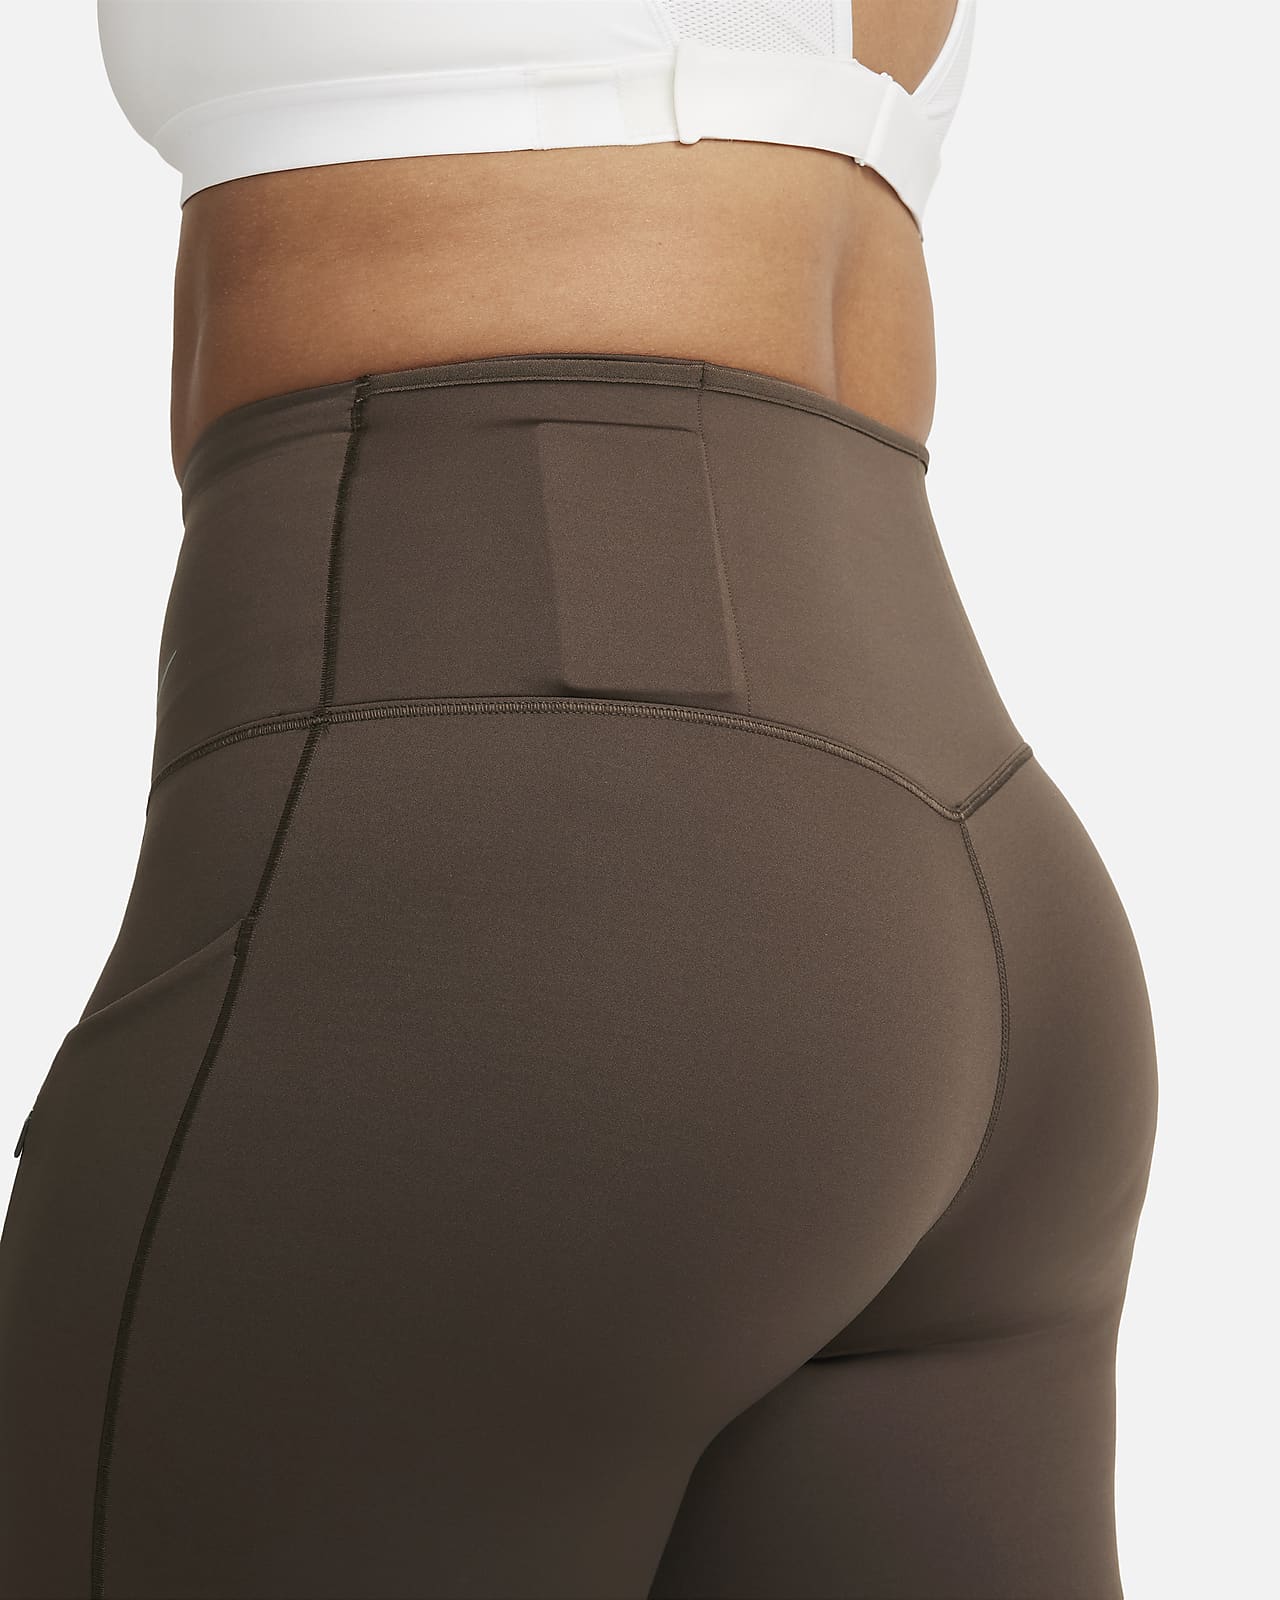 NIKE Womens Brown Moisture Wicking Pocketed Fitted Cropped Drawstring  Printed Active Wear High Waist Leggings XS 